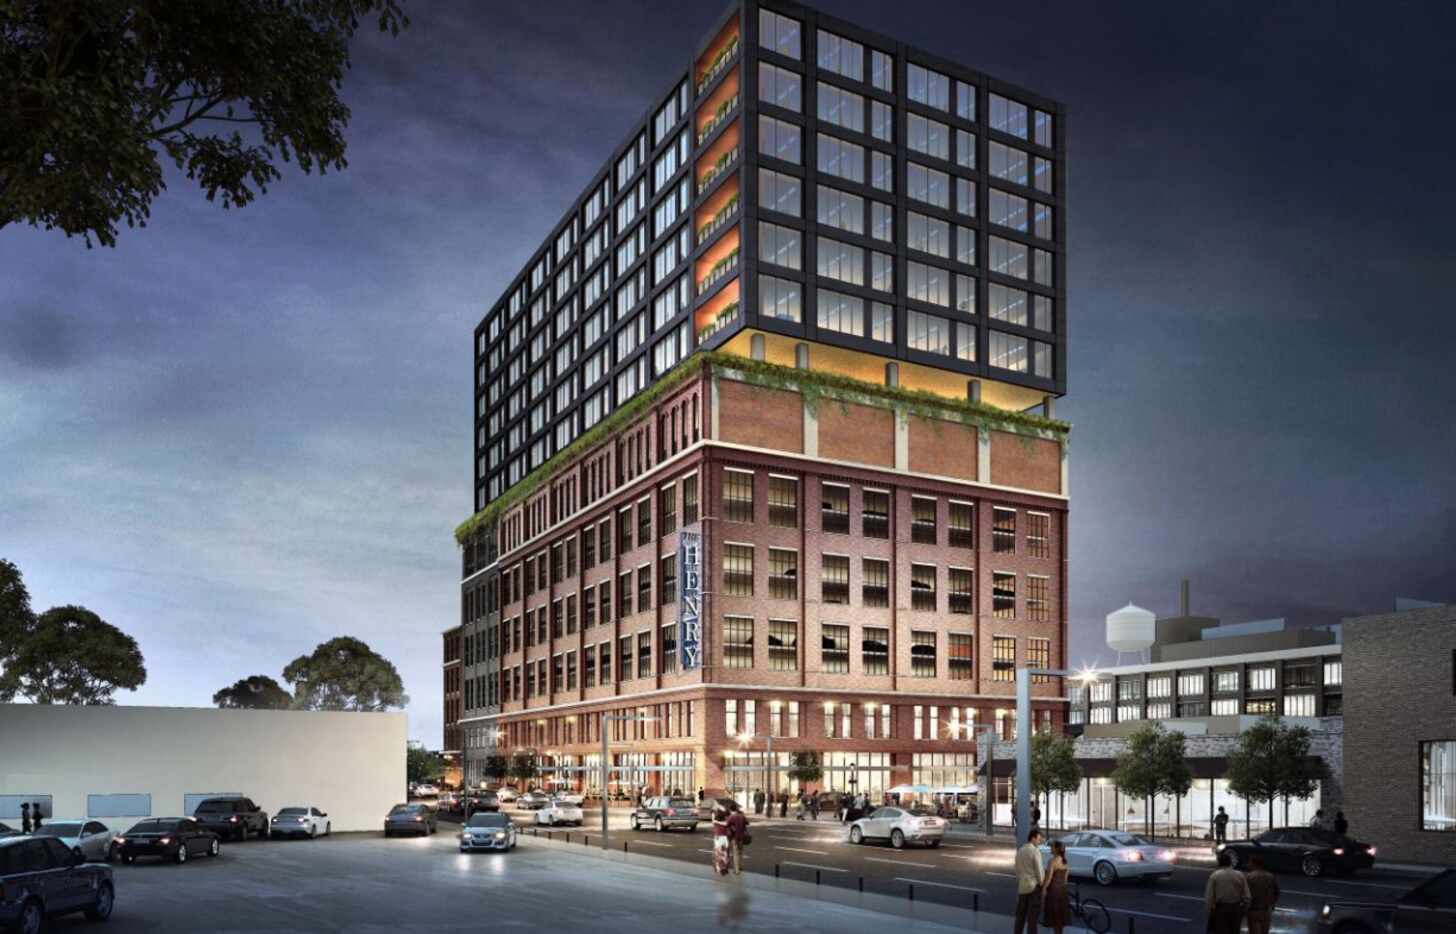 Developer Hines is working on plans for an office and retail tower in Dallas' Deep Ellum...